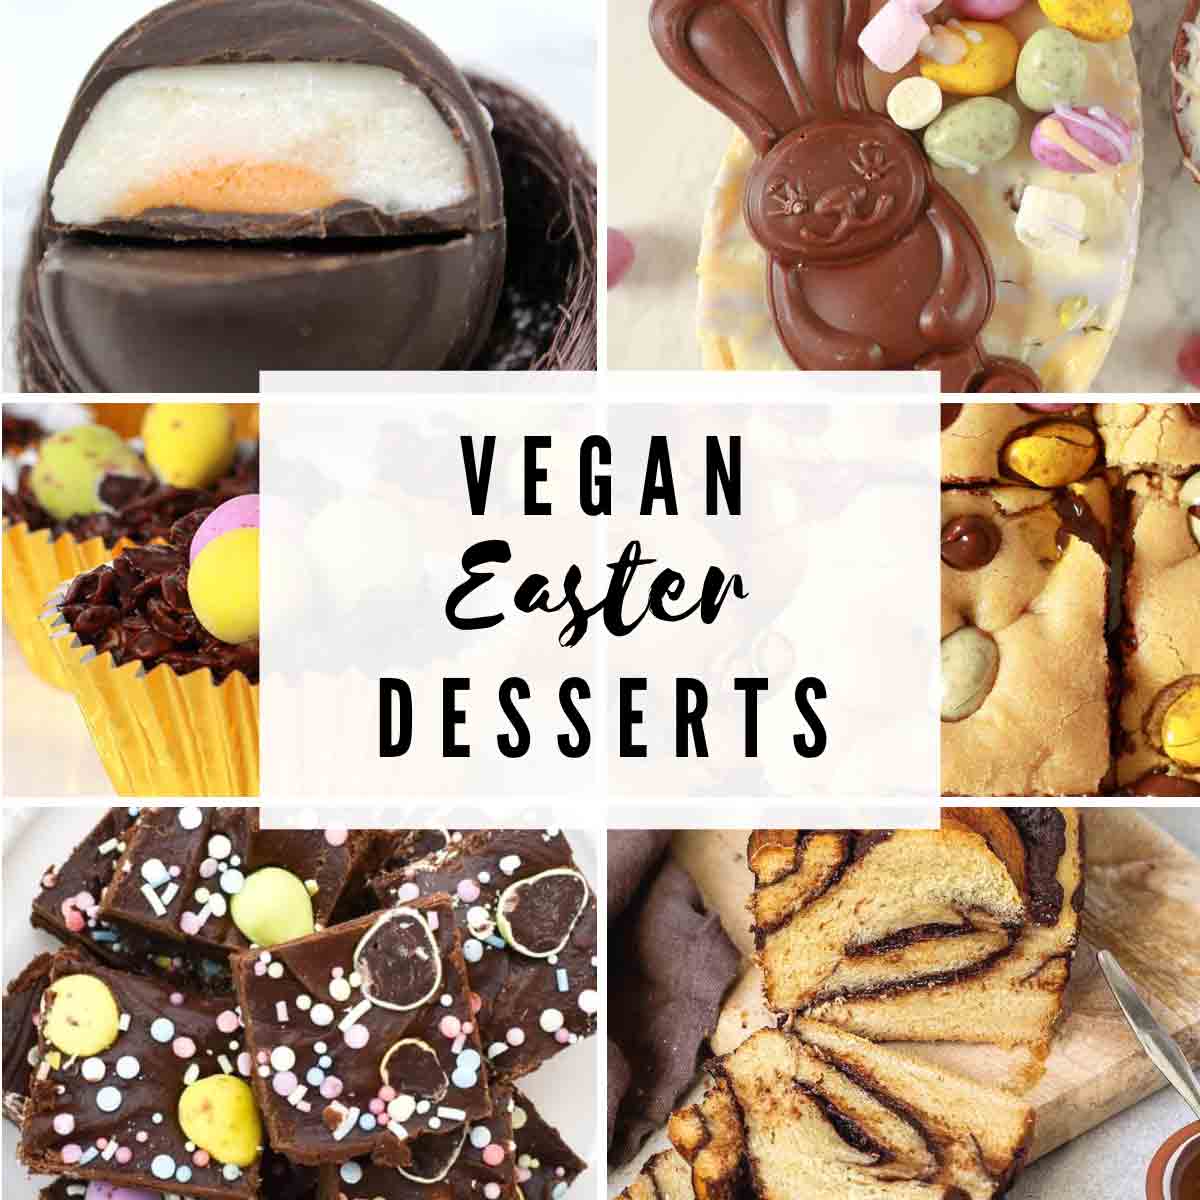 Image Collage Of Easter Desserts With Text Overlay